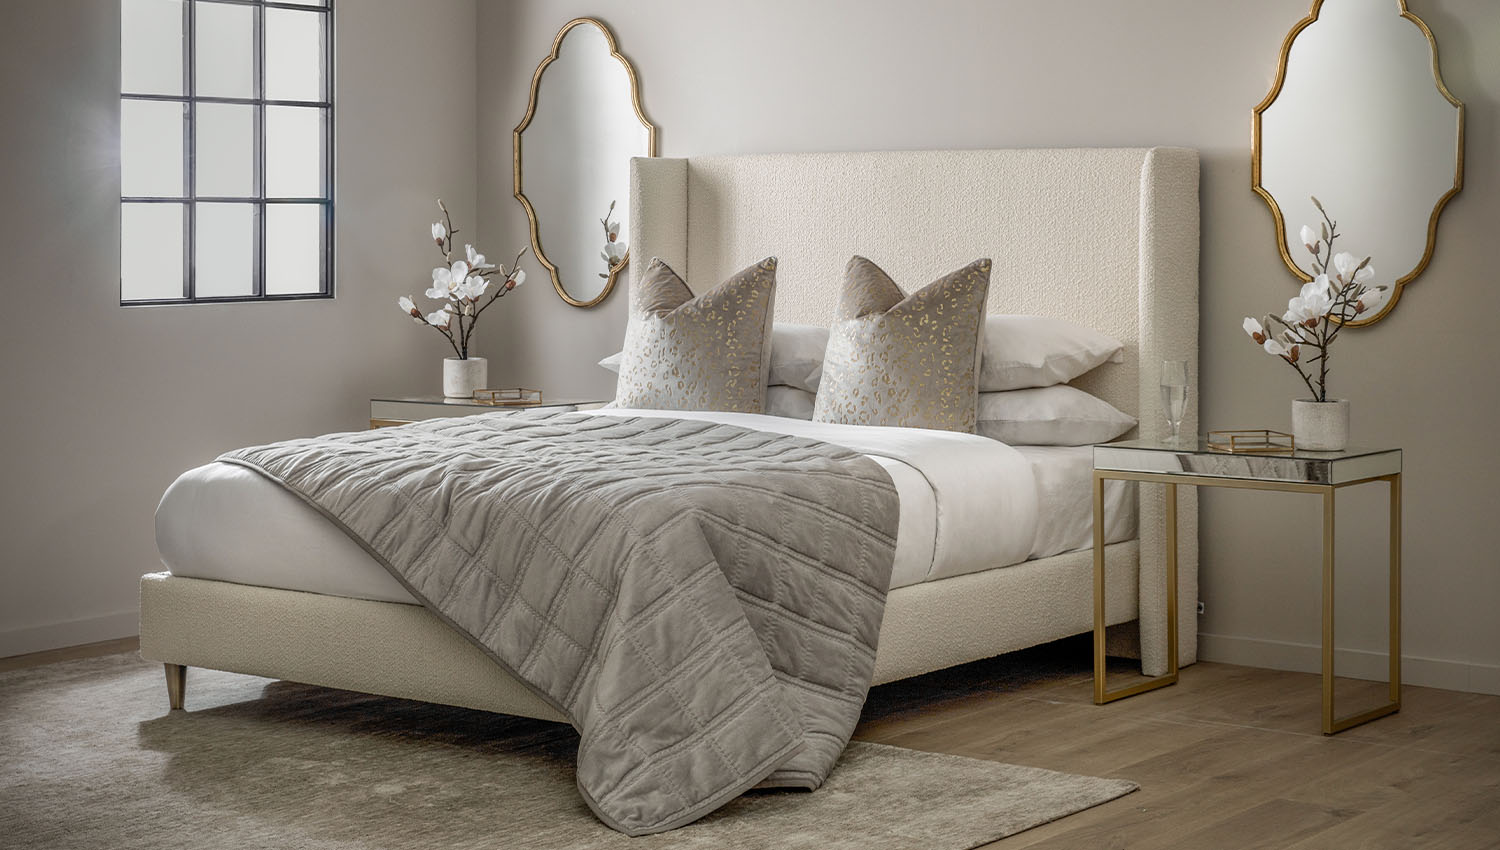 Our Bed Buying Guide